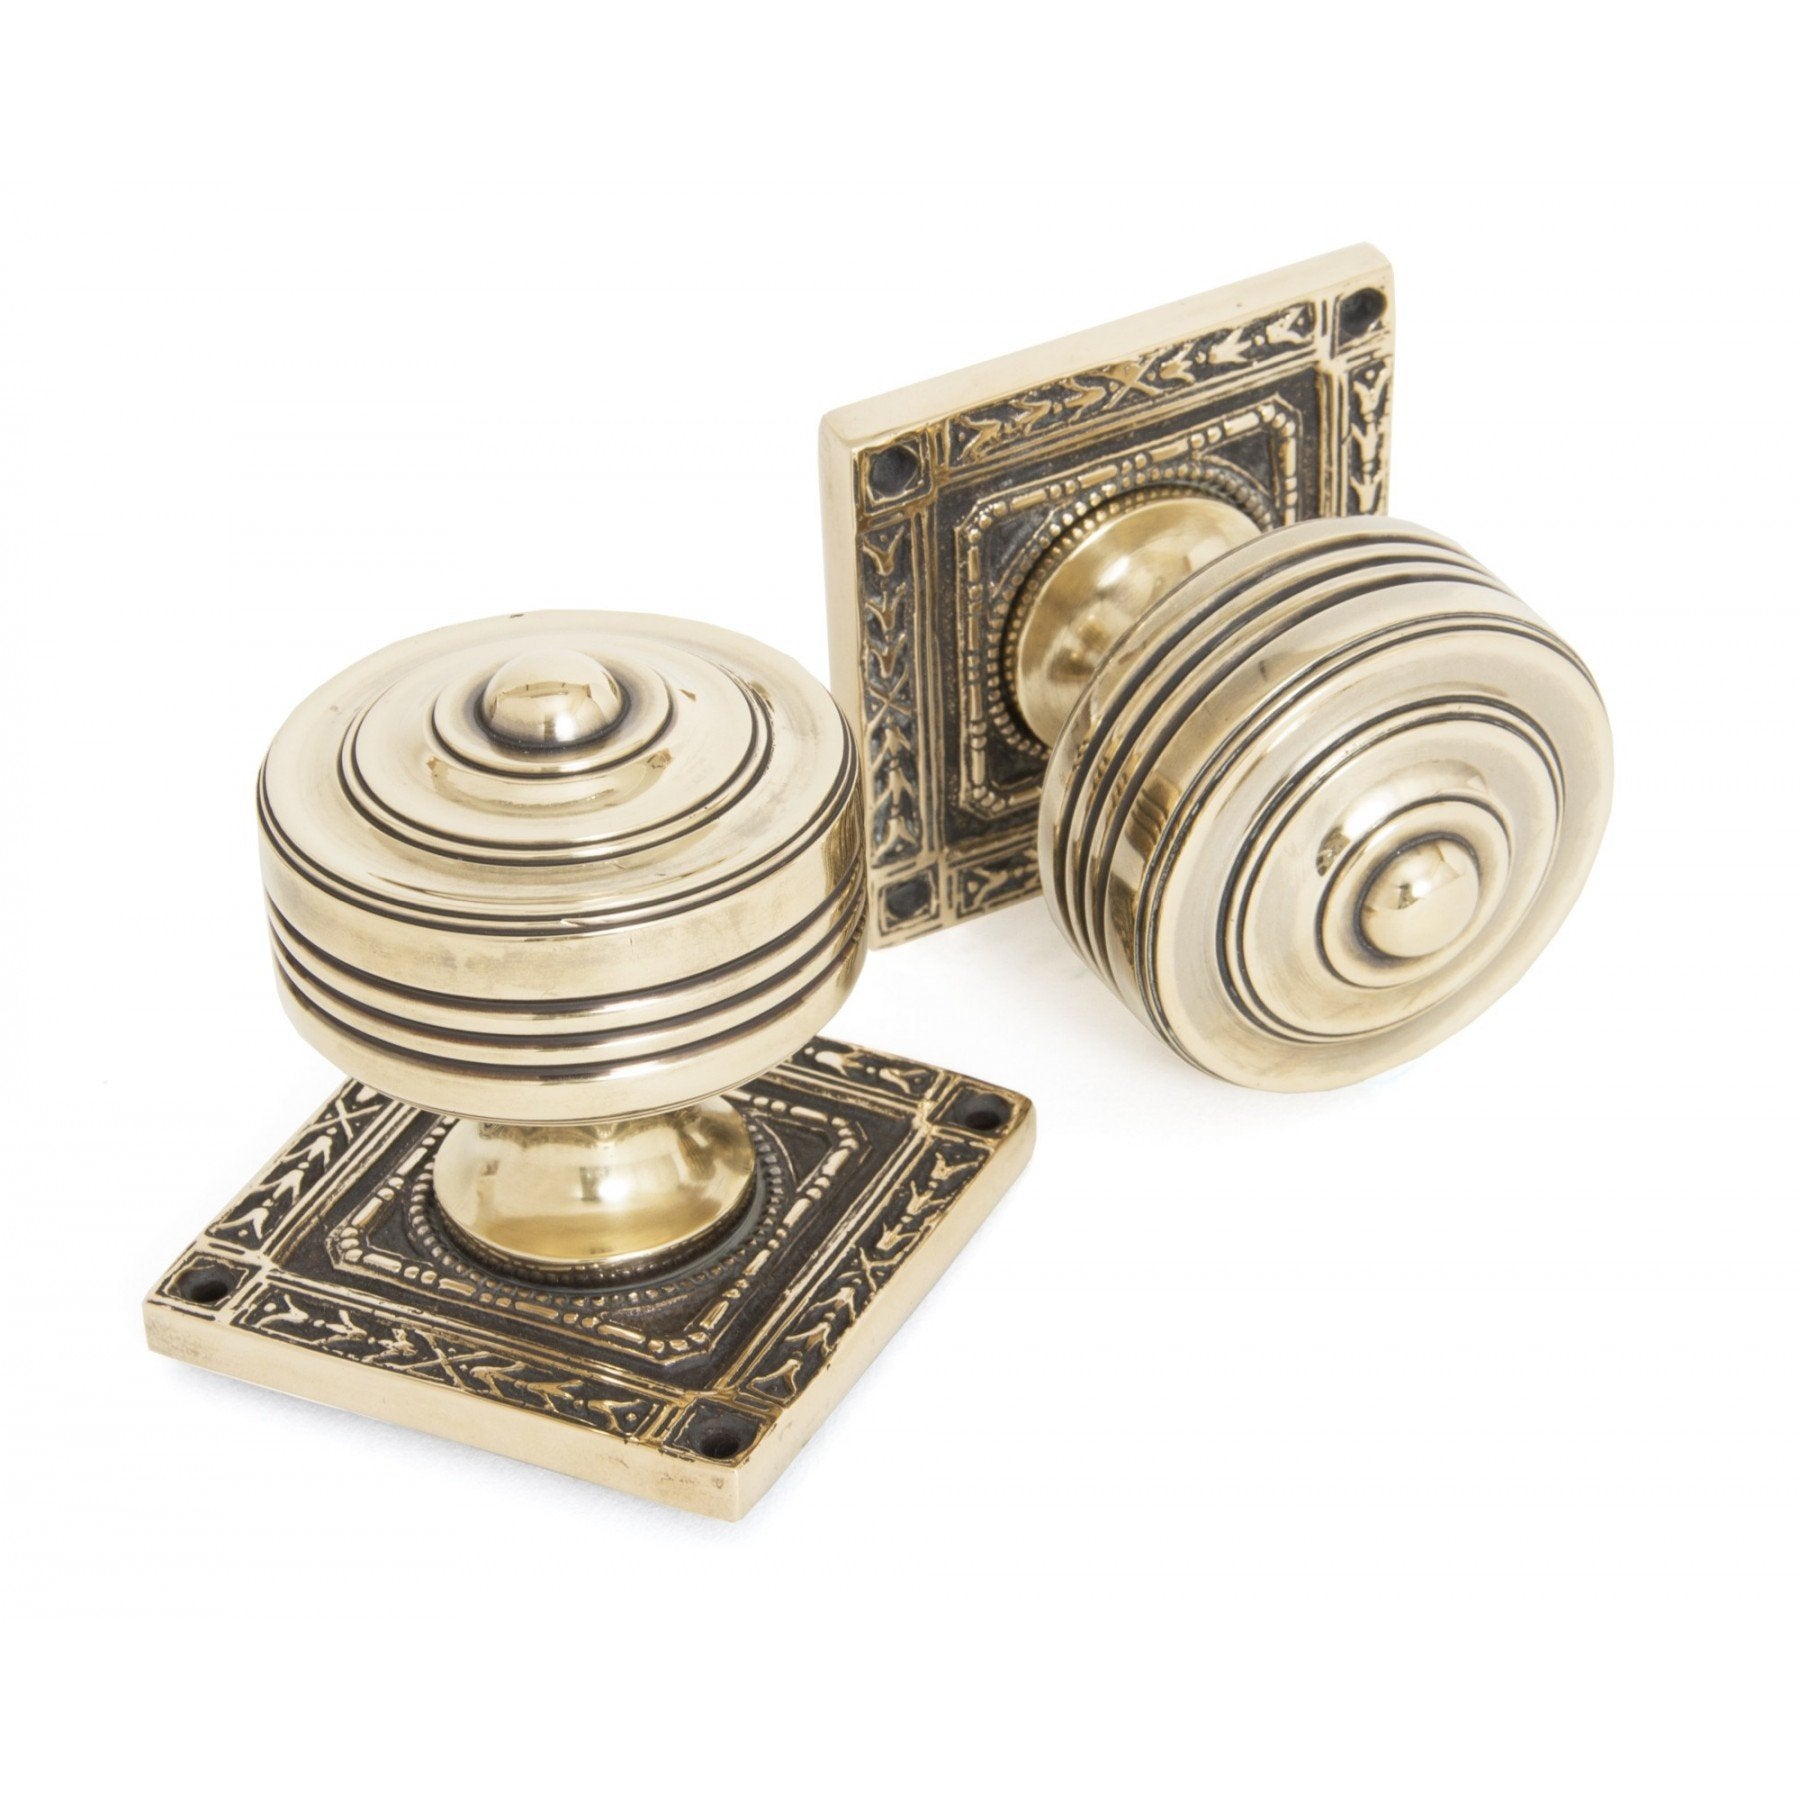 From the Anvil Aged Brass Tewkesbury Square Mortice Knob Set - No.42 Interiors